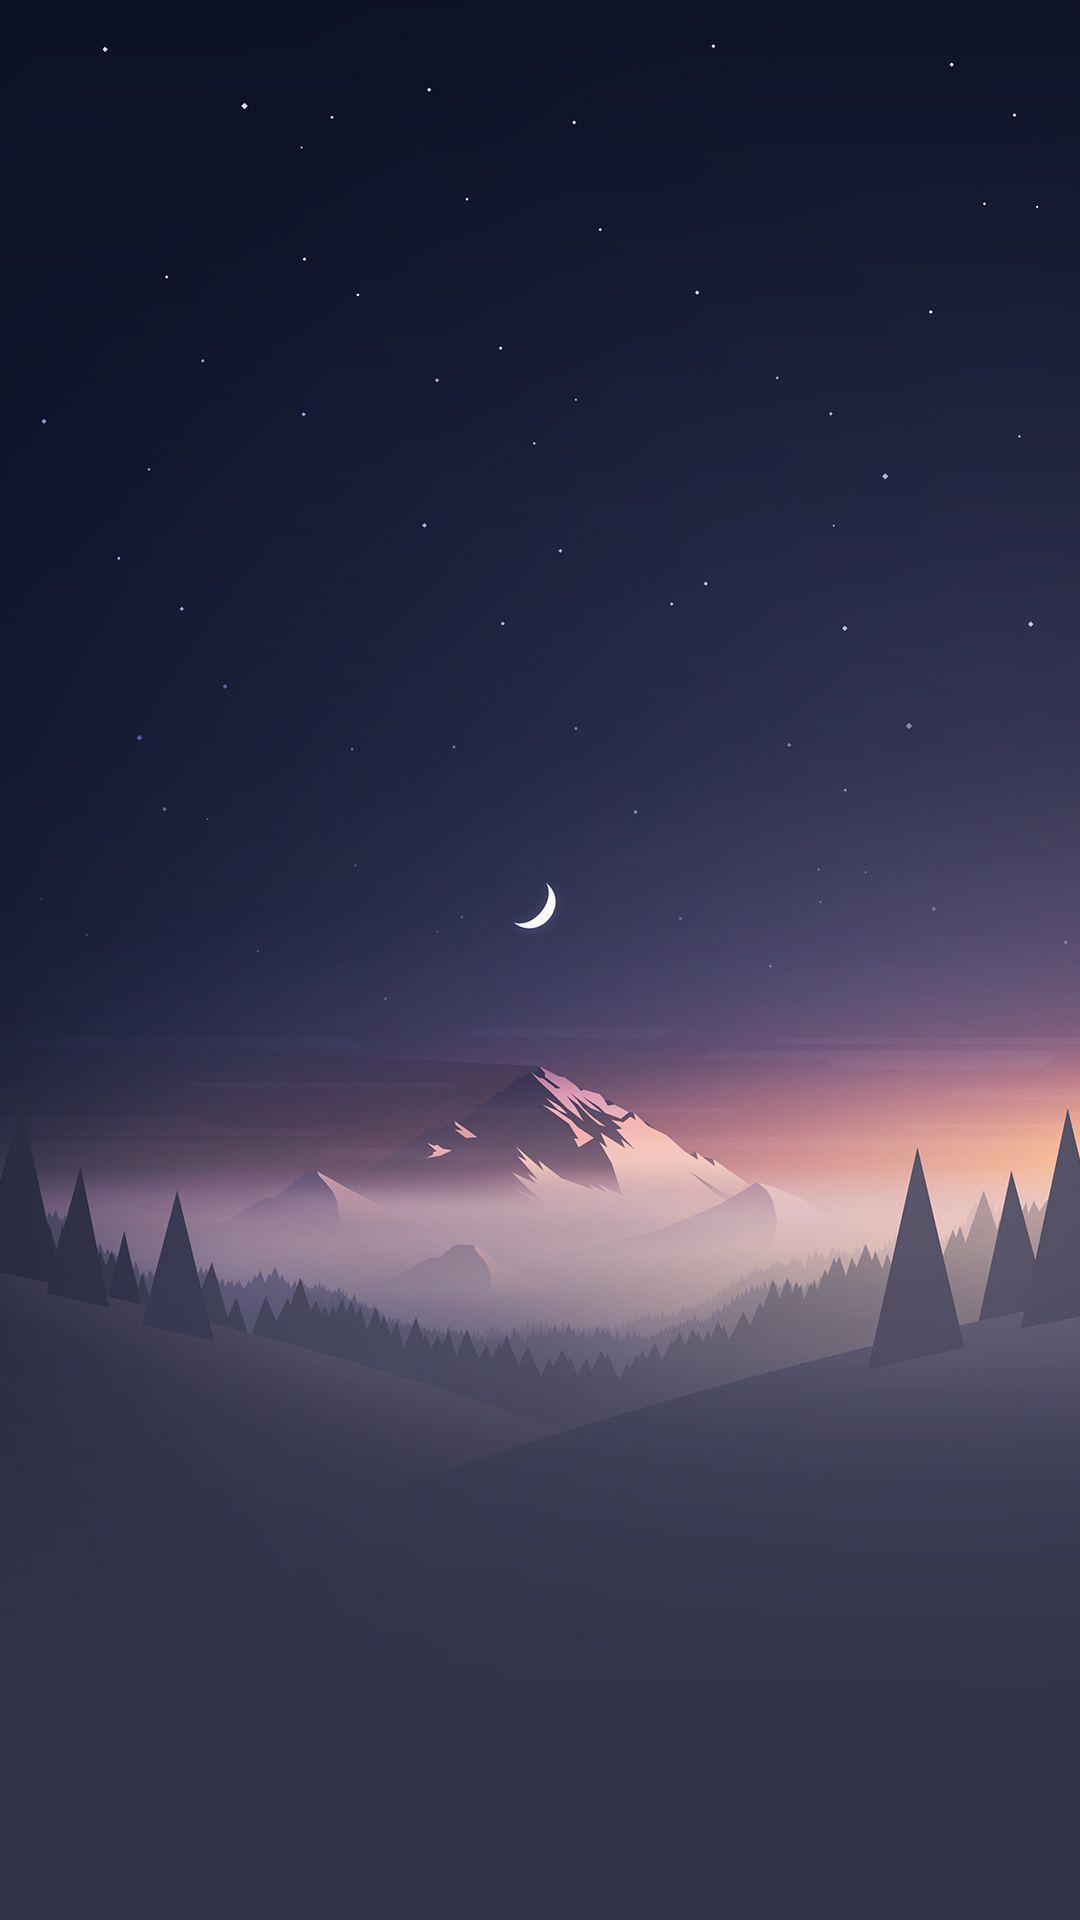 Stars And Moon Winter Mountain Landscape iPhone HD Wallpaper